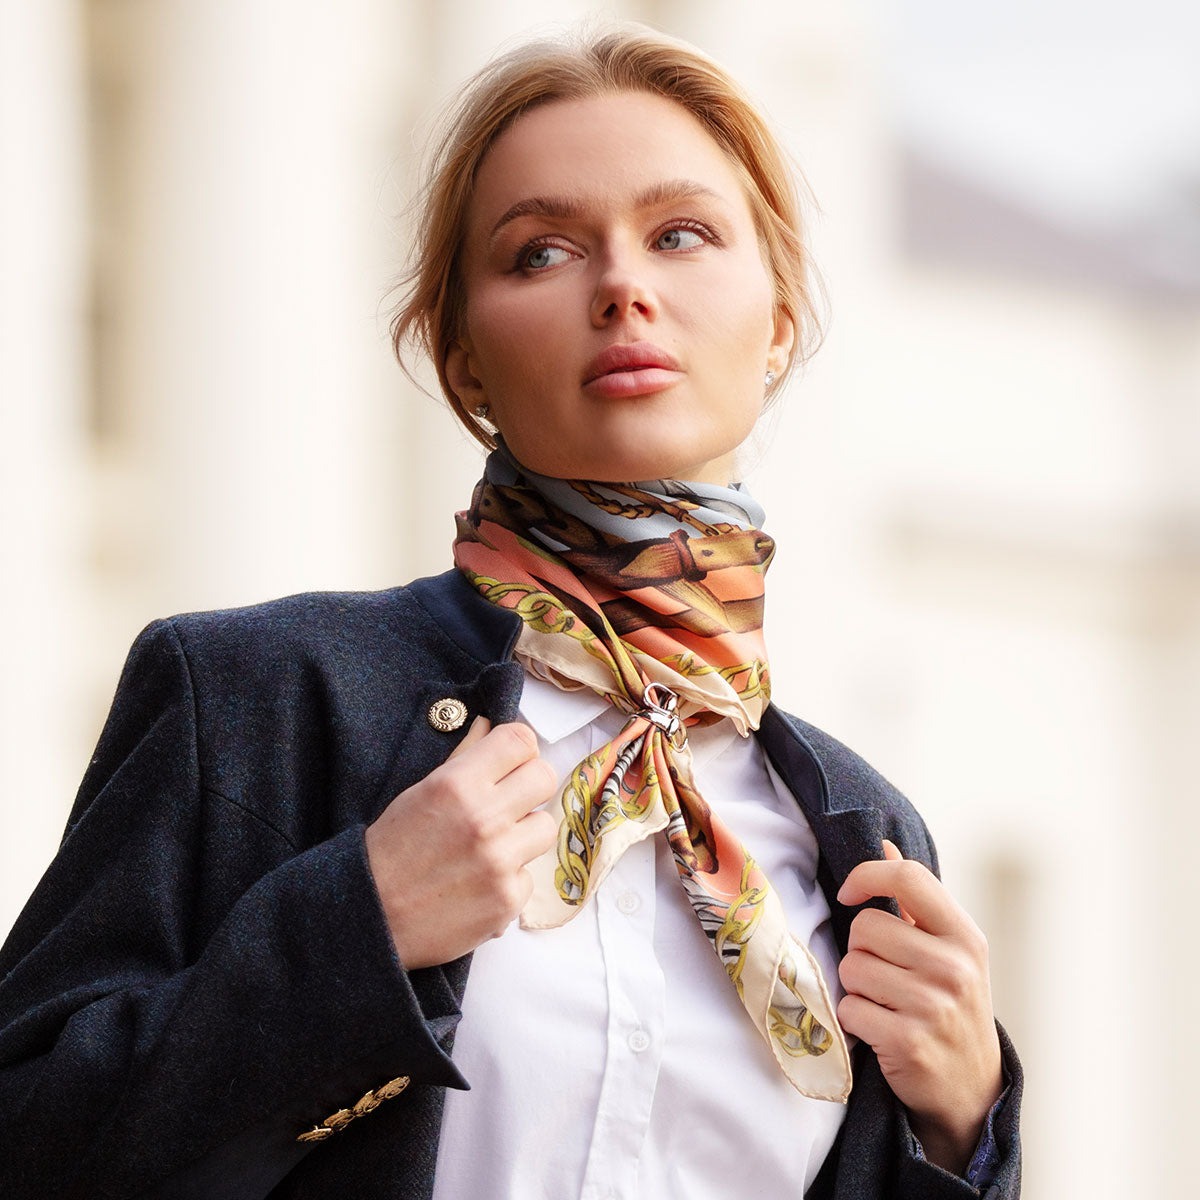 How to: Wear a silk scarf - The Art of Style